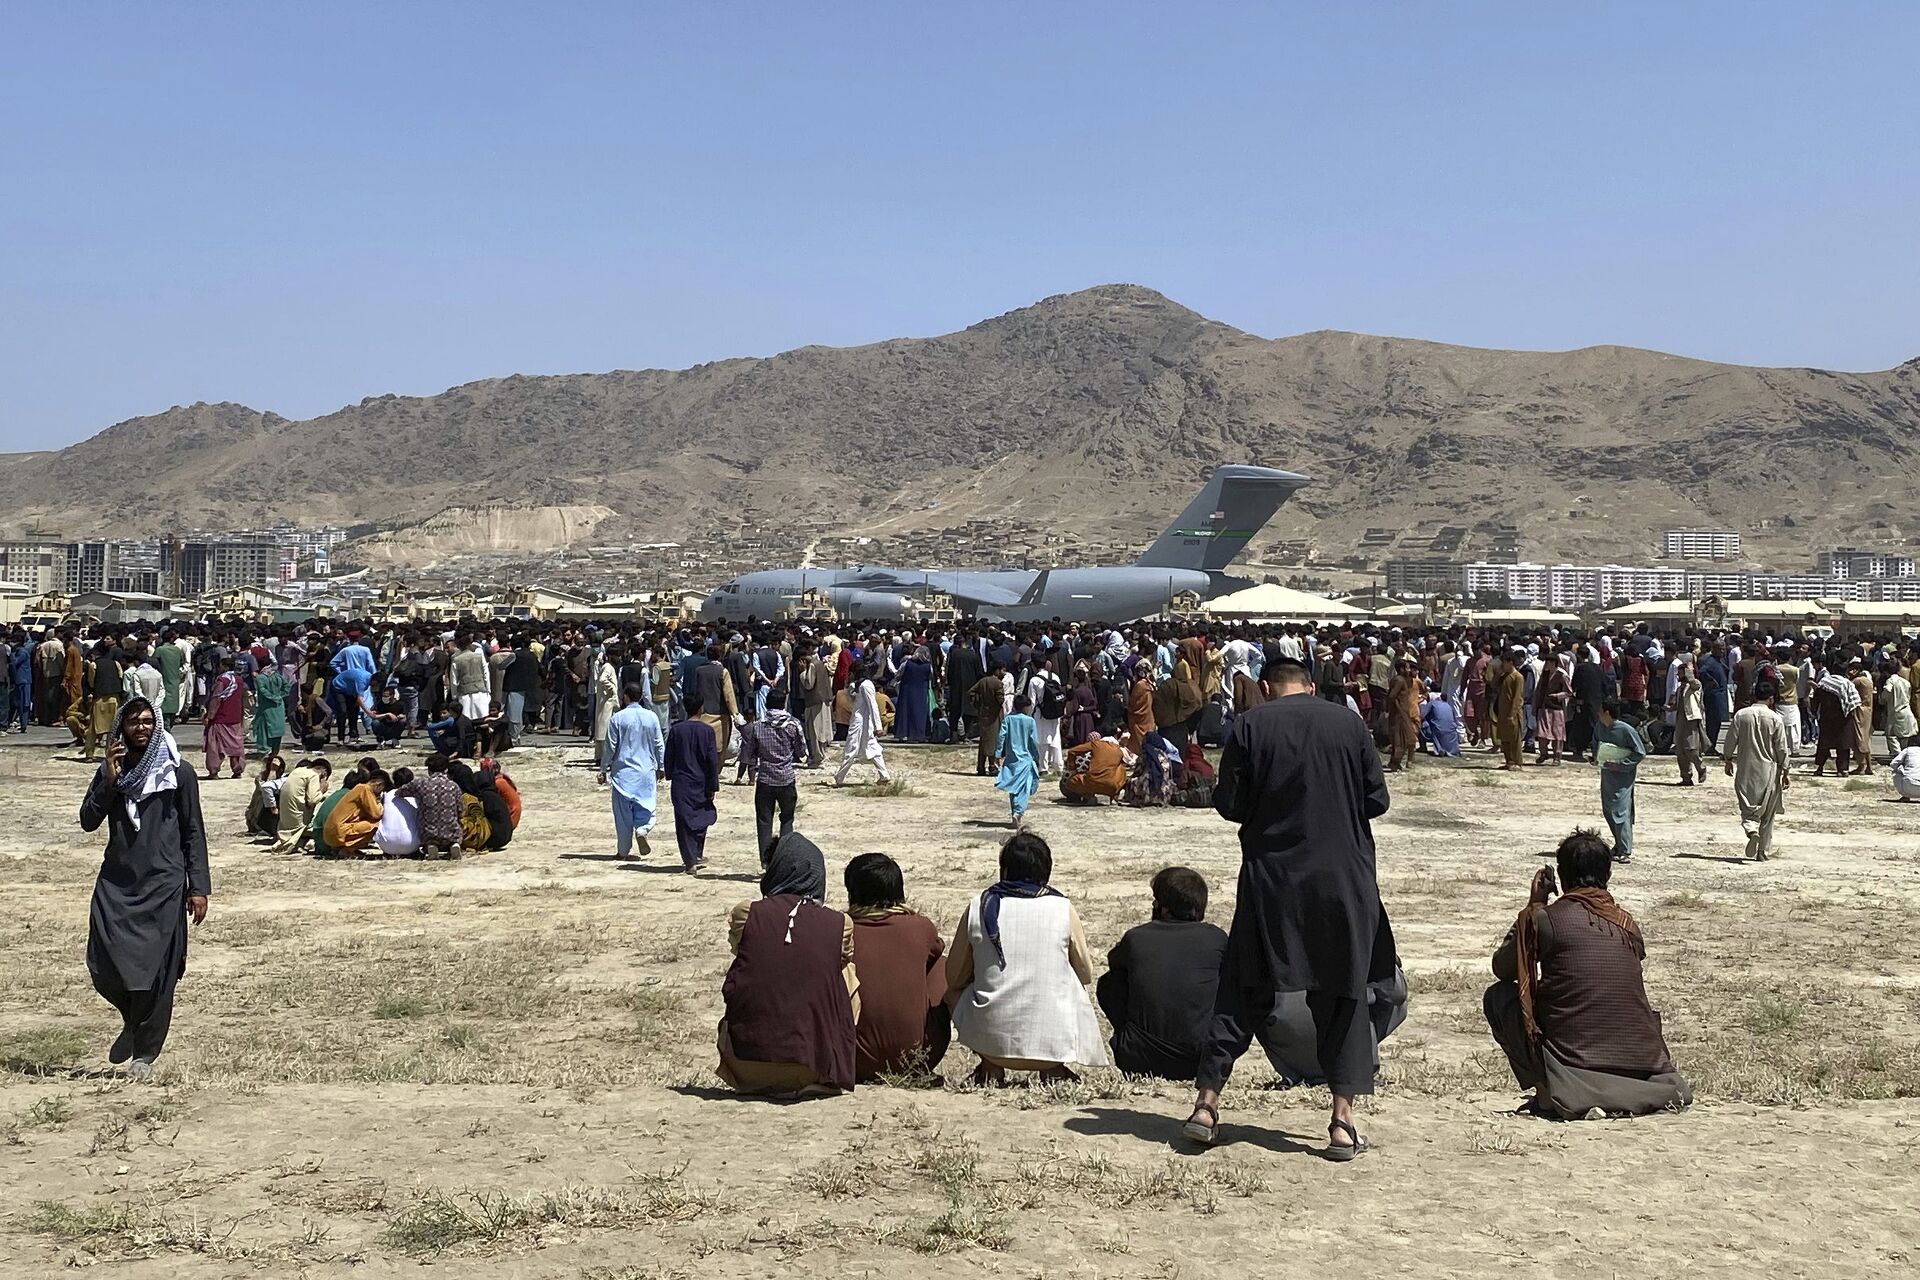 Hundreds of people gather near a U.S. Air Force C-17 transport plane at a perimeter at the international airport in Kabul, Afghanistan, Monday, Aug. 16, 2021 - Sputnik International, 1920, 07.09.2021